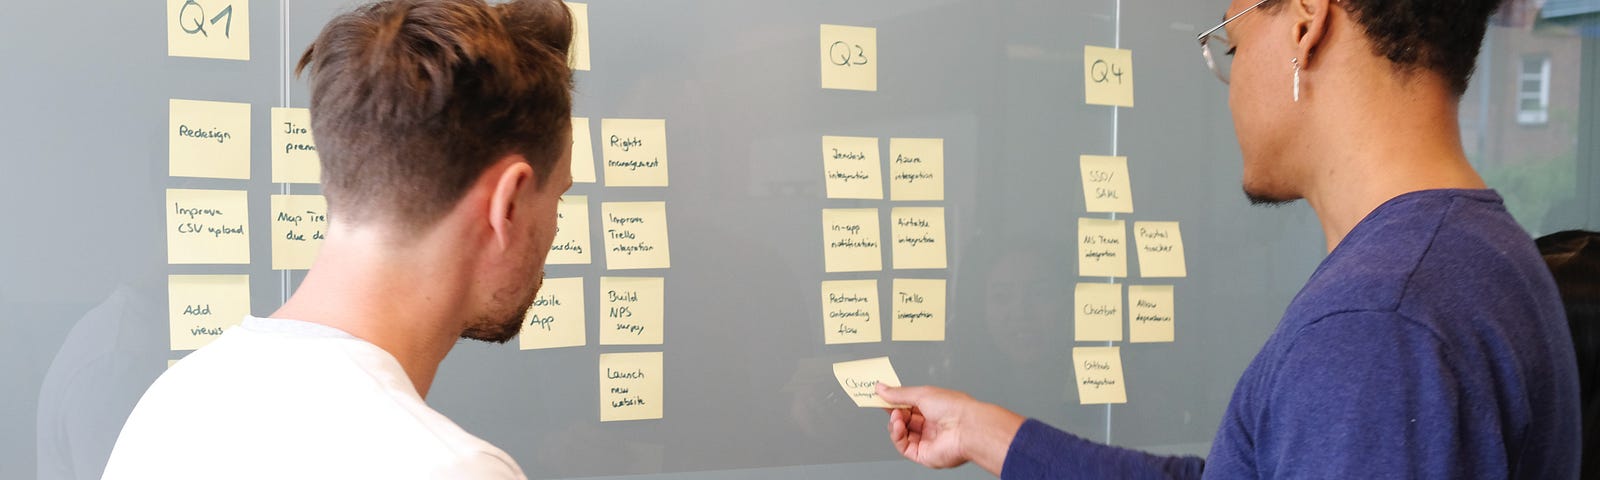 Two people, one wearing a long-sleeve white shirt, the other wearing a long-sleeve purple shirt, use post-it notes to plan the four quarters of a business.